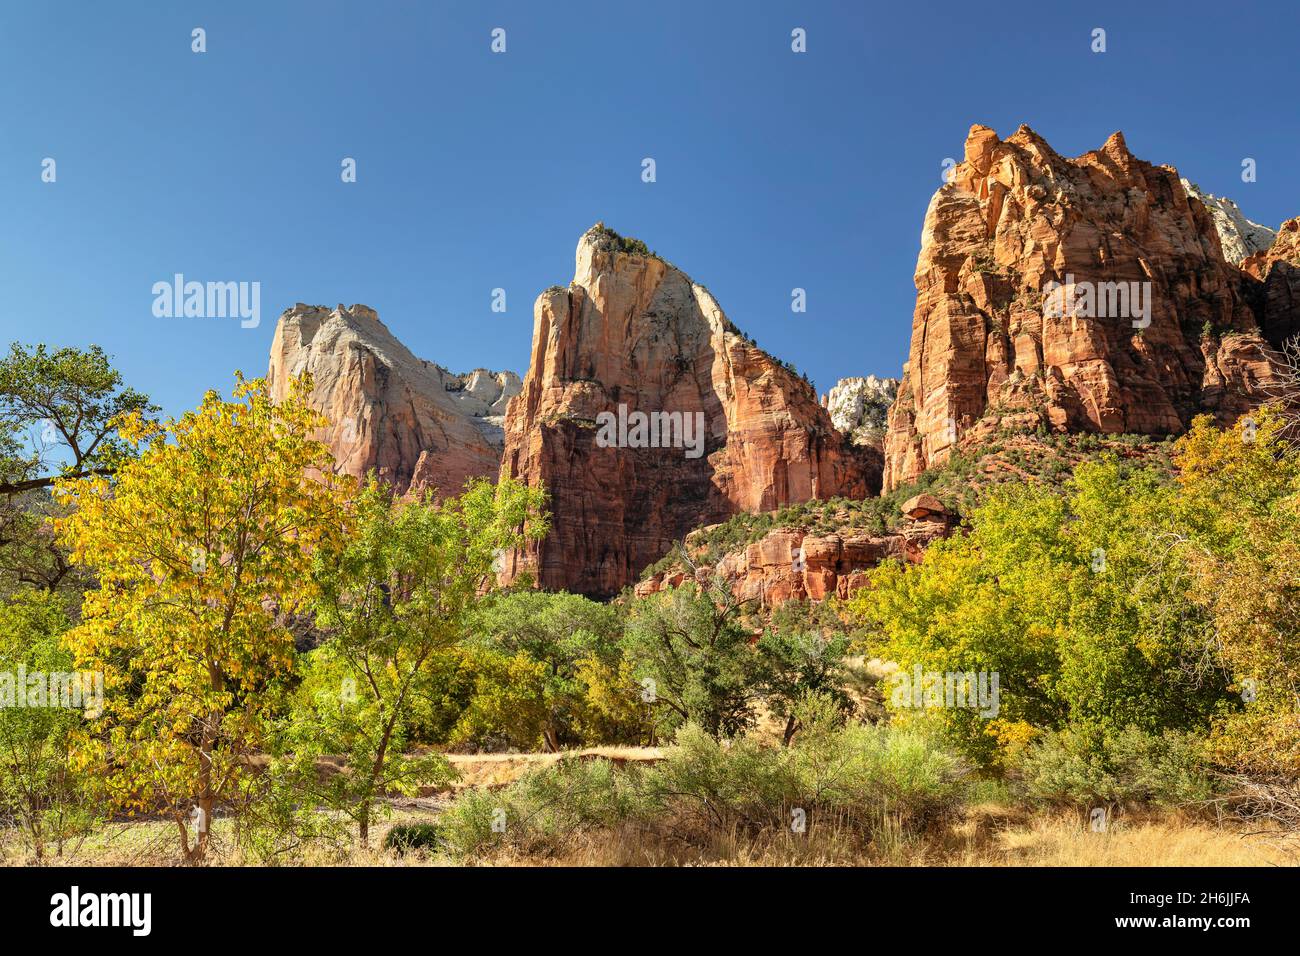 Court of Patriarchs, Zion National Park, Colorado Plateau, Utah, United States of America, North America Stock Photo